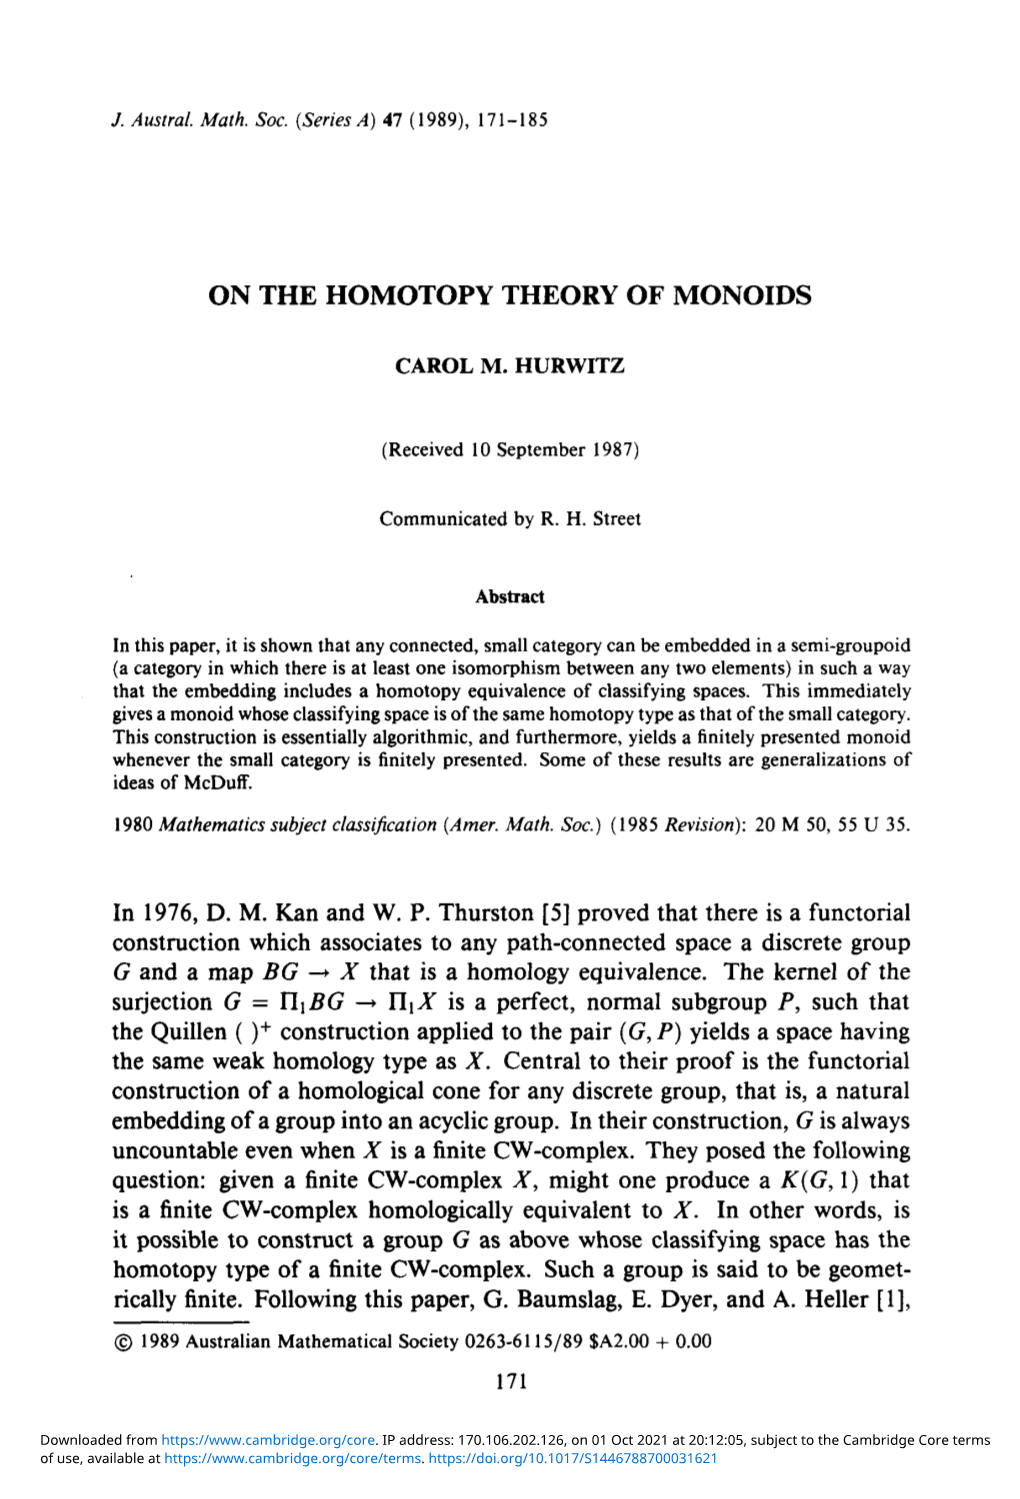 On the Homotopy Theory of Monoids